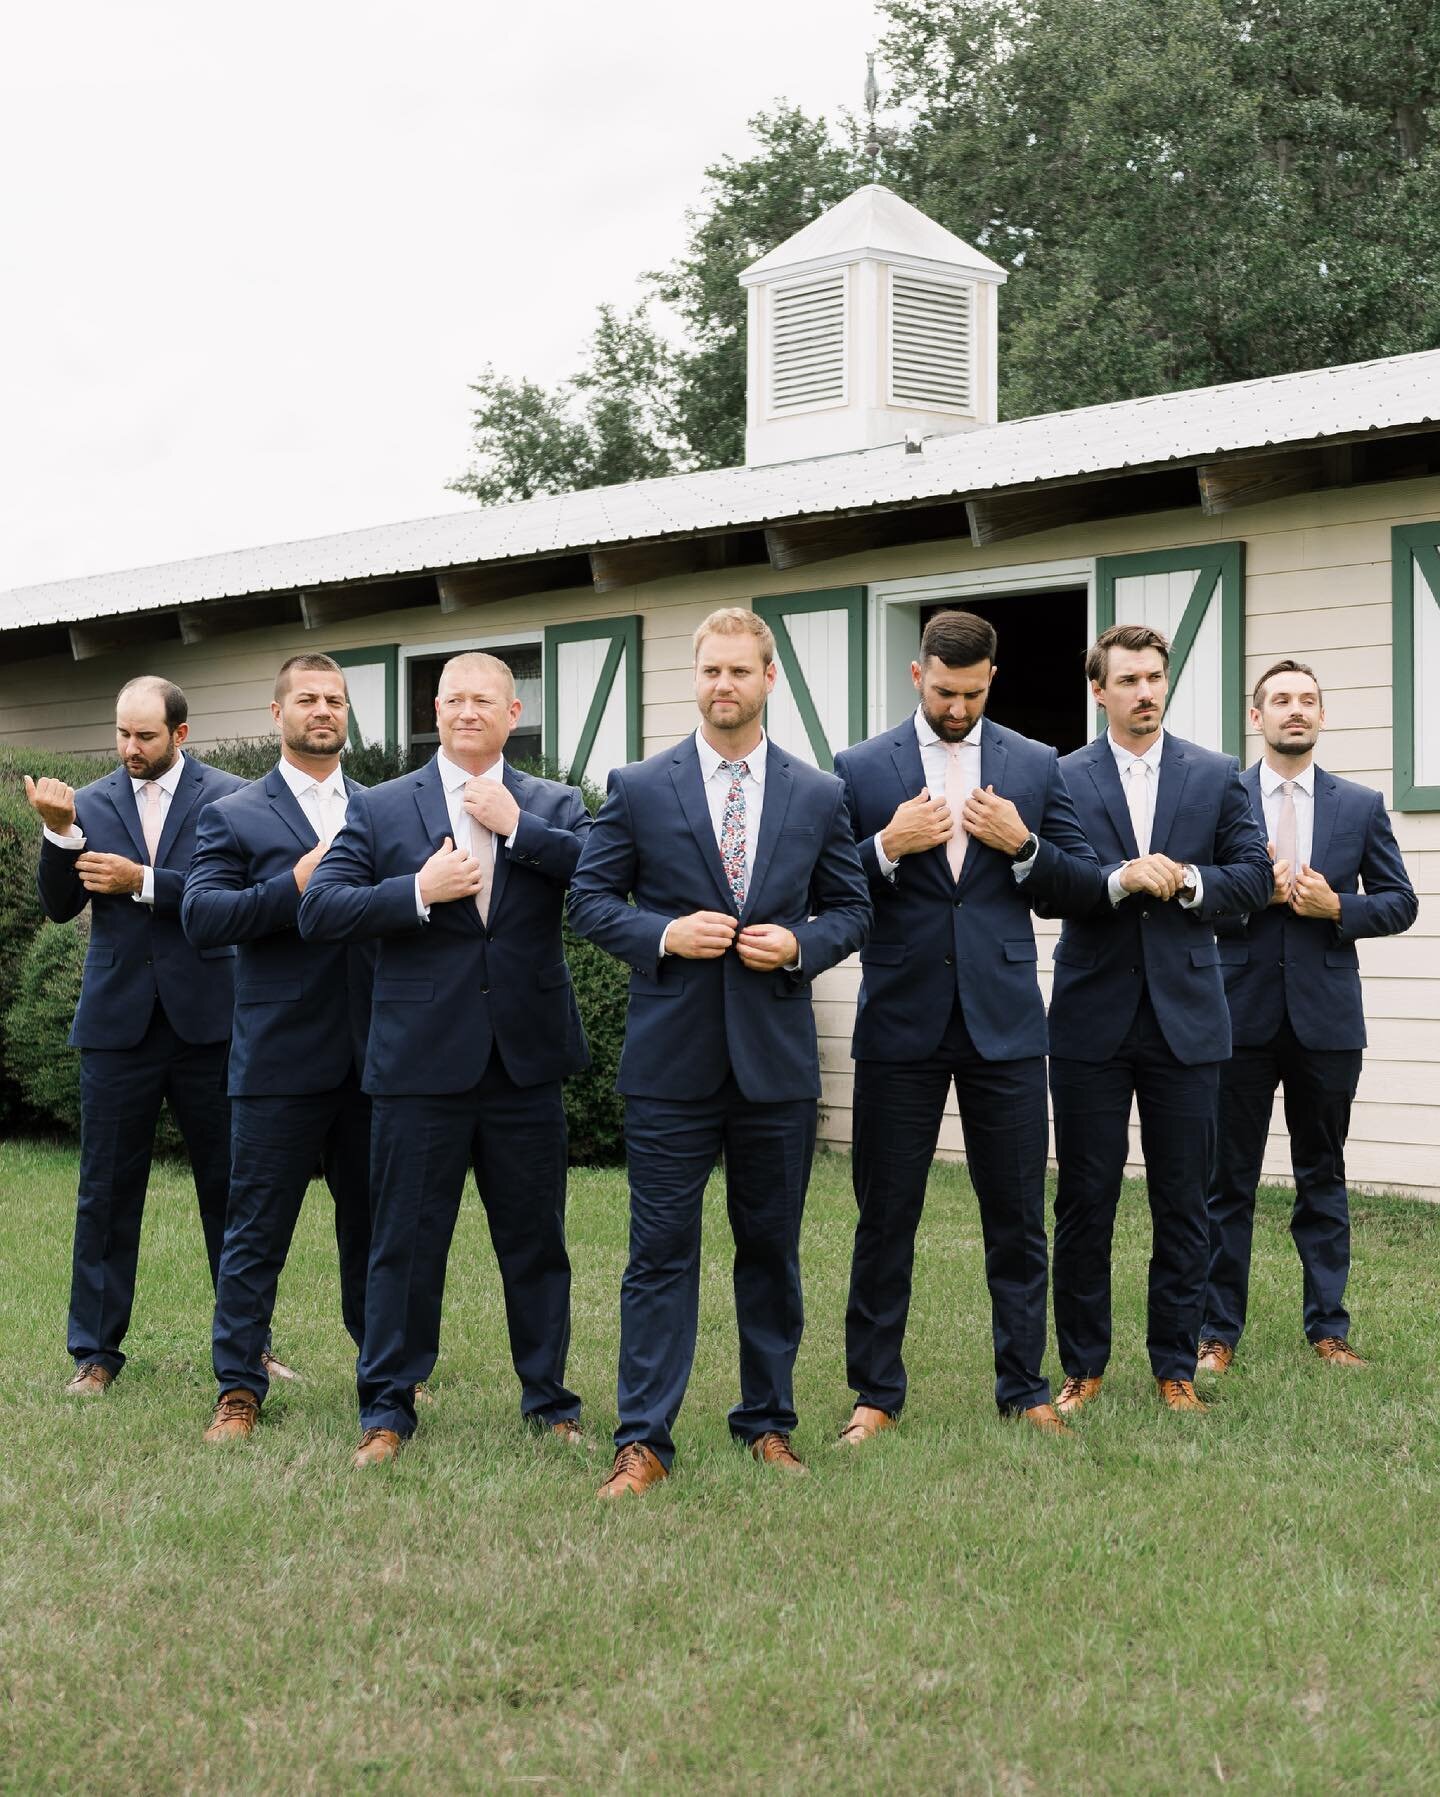 As much as guys don&rsquo;t like to admit it, they like to have their photos taken too!!!
-
Time and time again I&rsquo;ve seen so many genuine smiles from grooms with their groomsmen during their photos. Although I&rsquo;ll admit they will start out